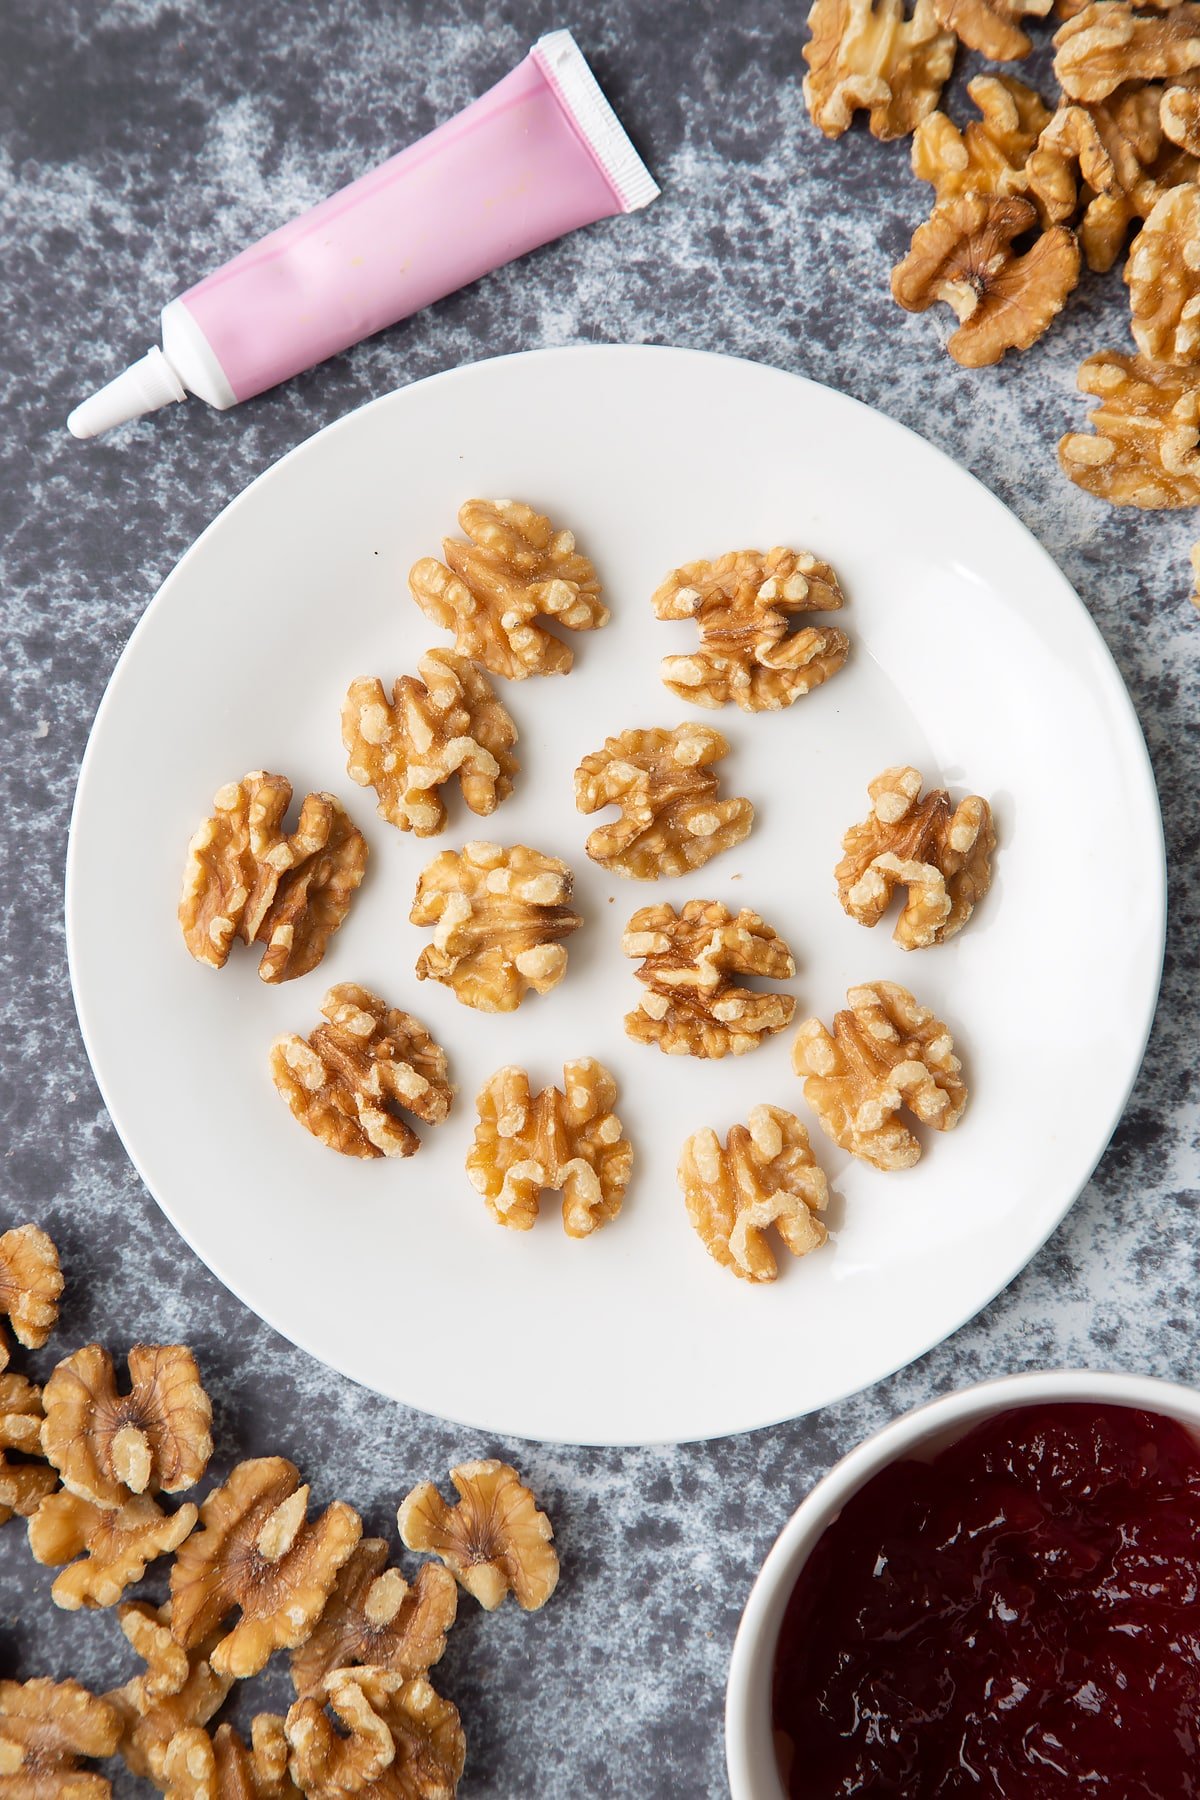 Walnuts on a white plate. Ingredients to make gory Halloween cupcakes surround them.